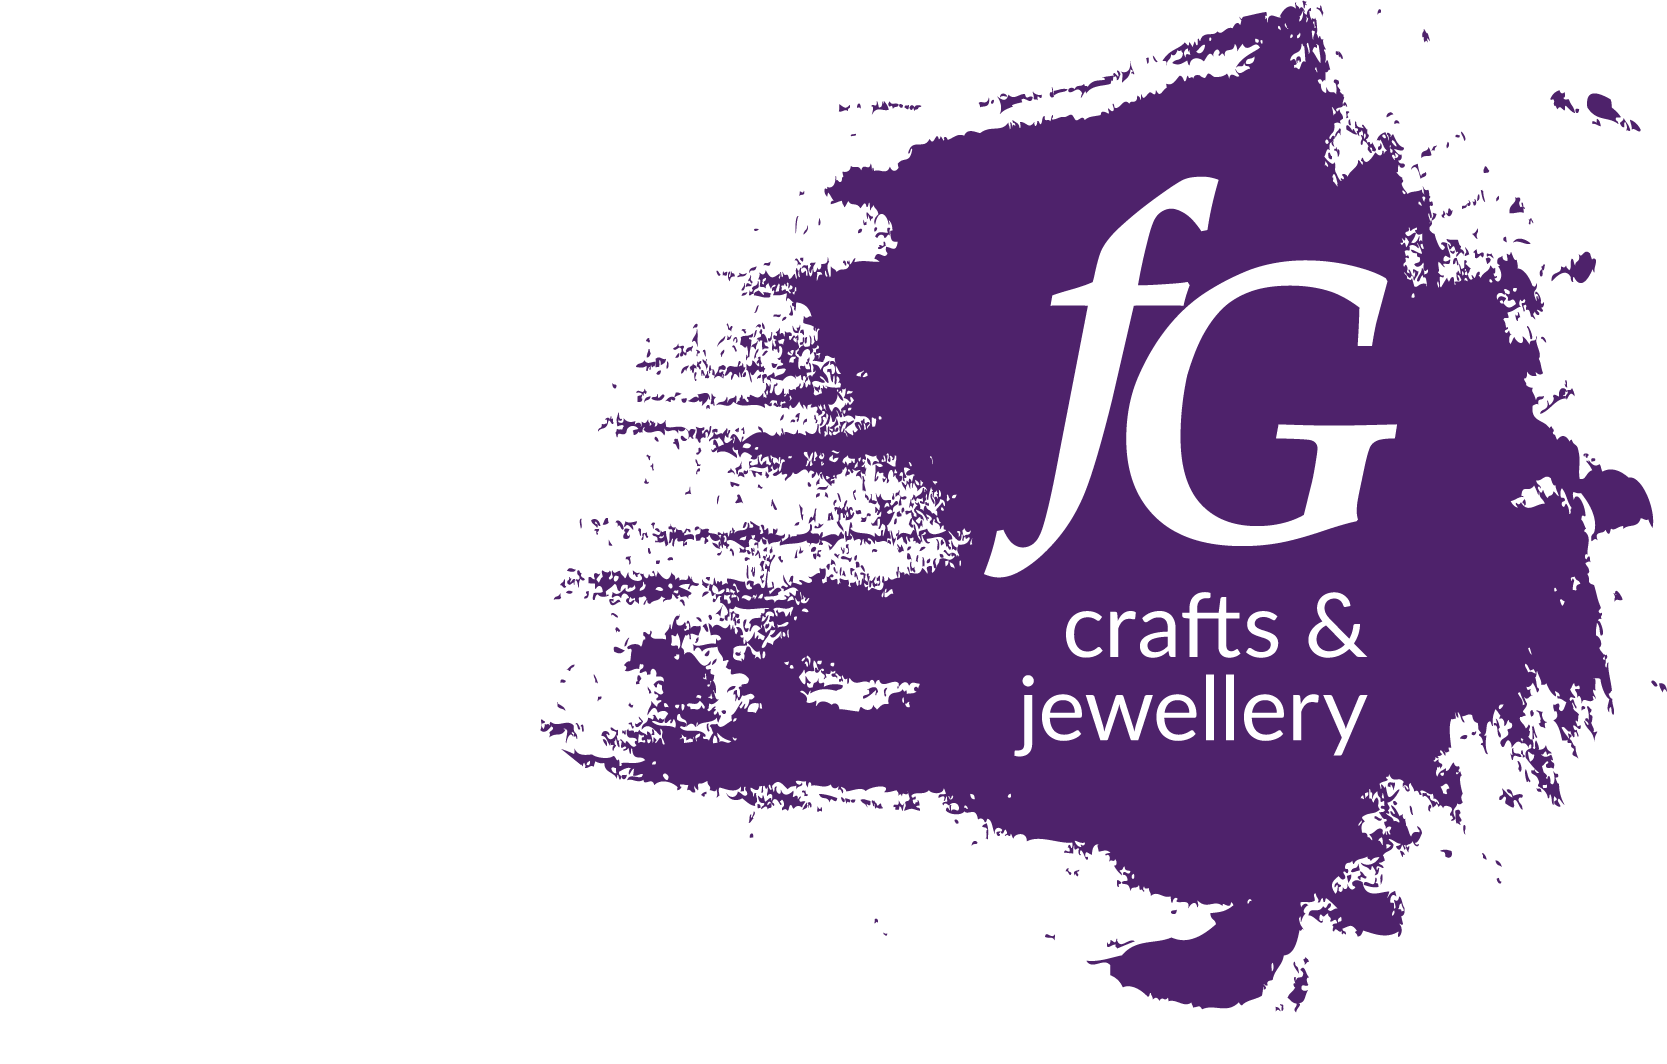 FG Crafts and Jewellery